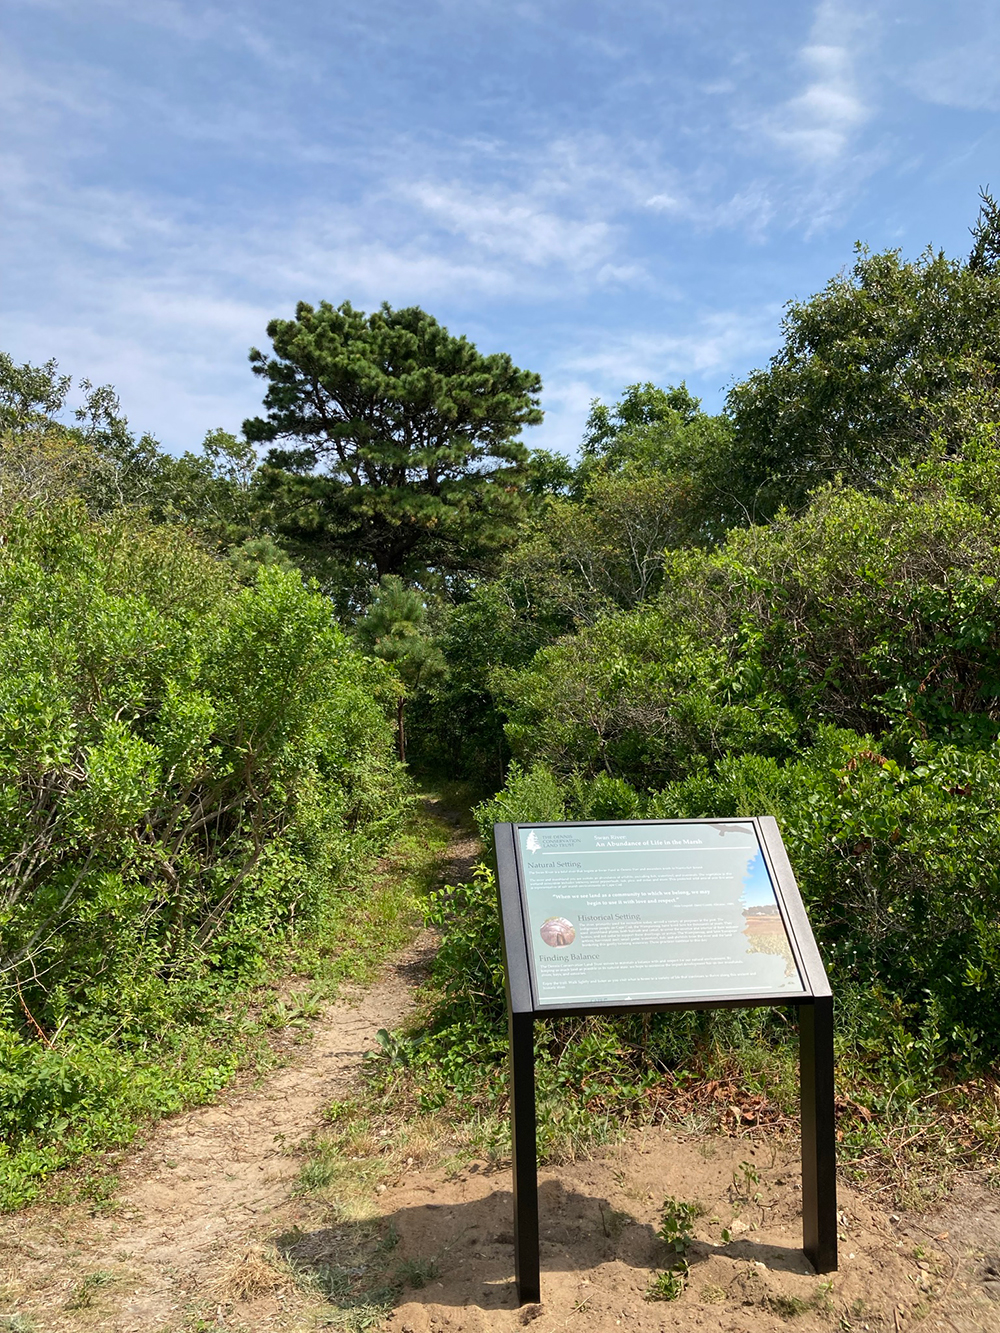 swan river overlook trail entrance